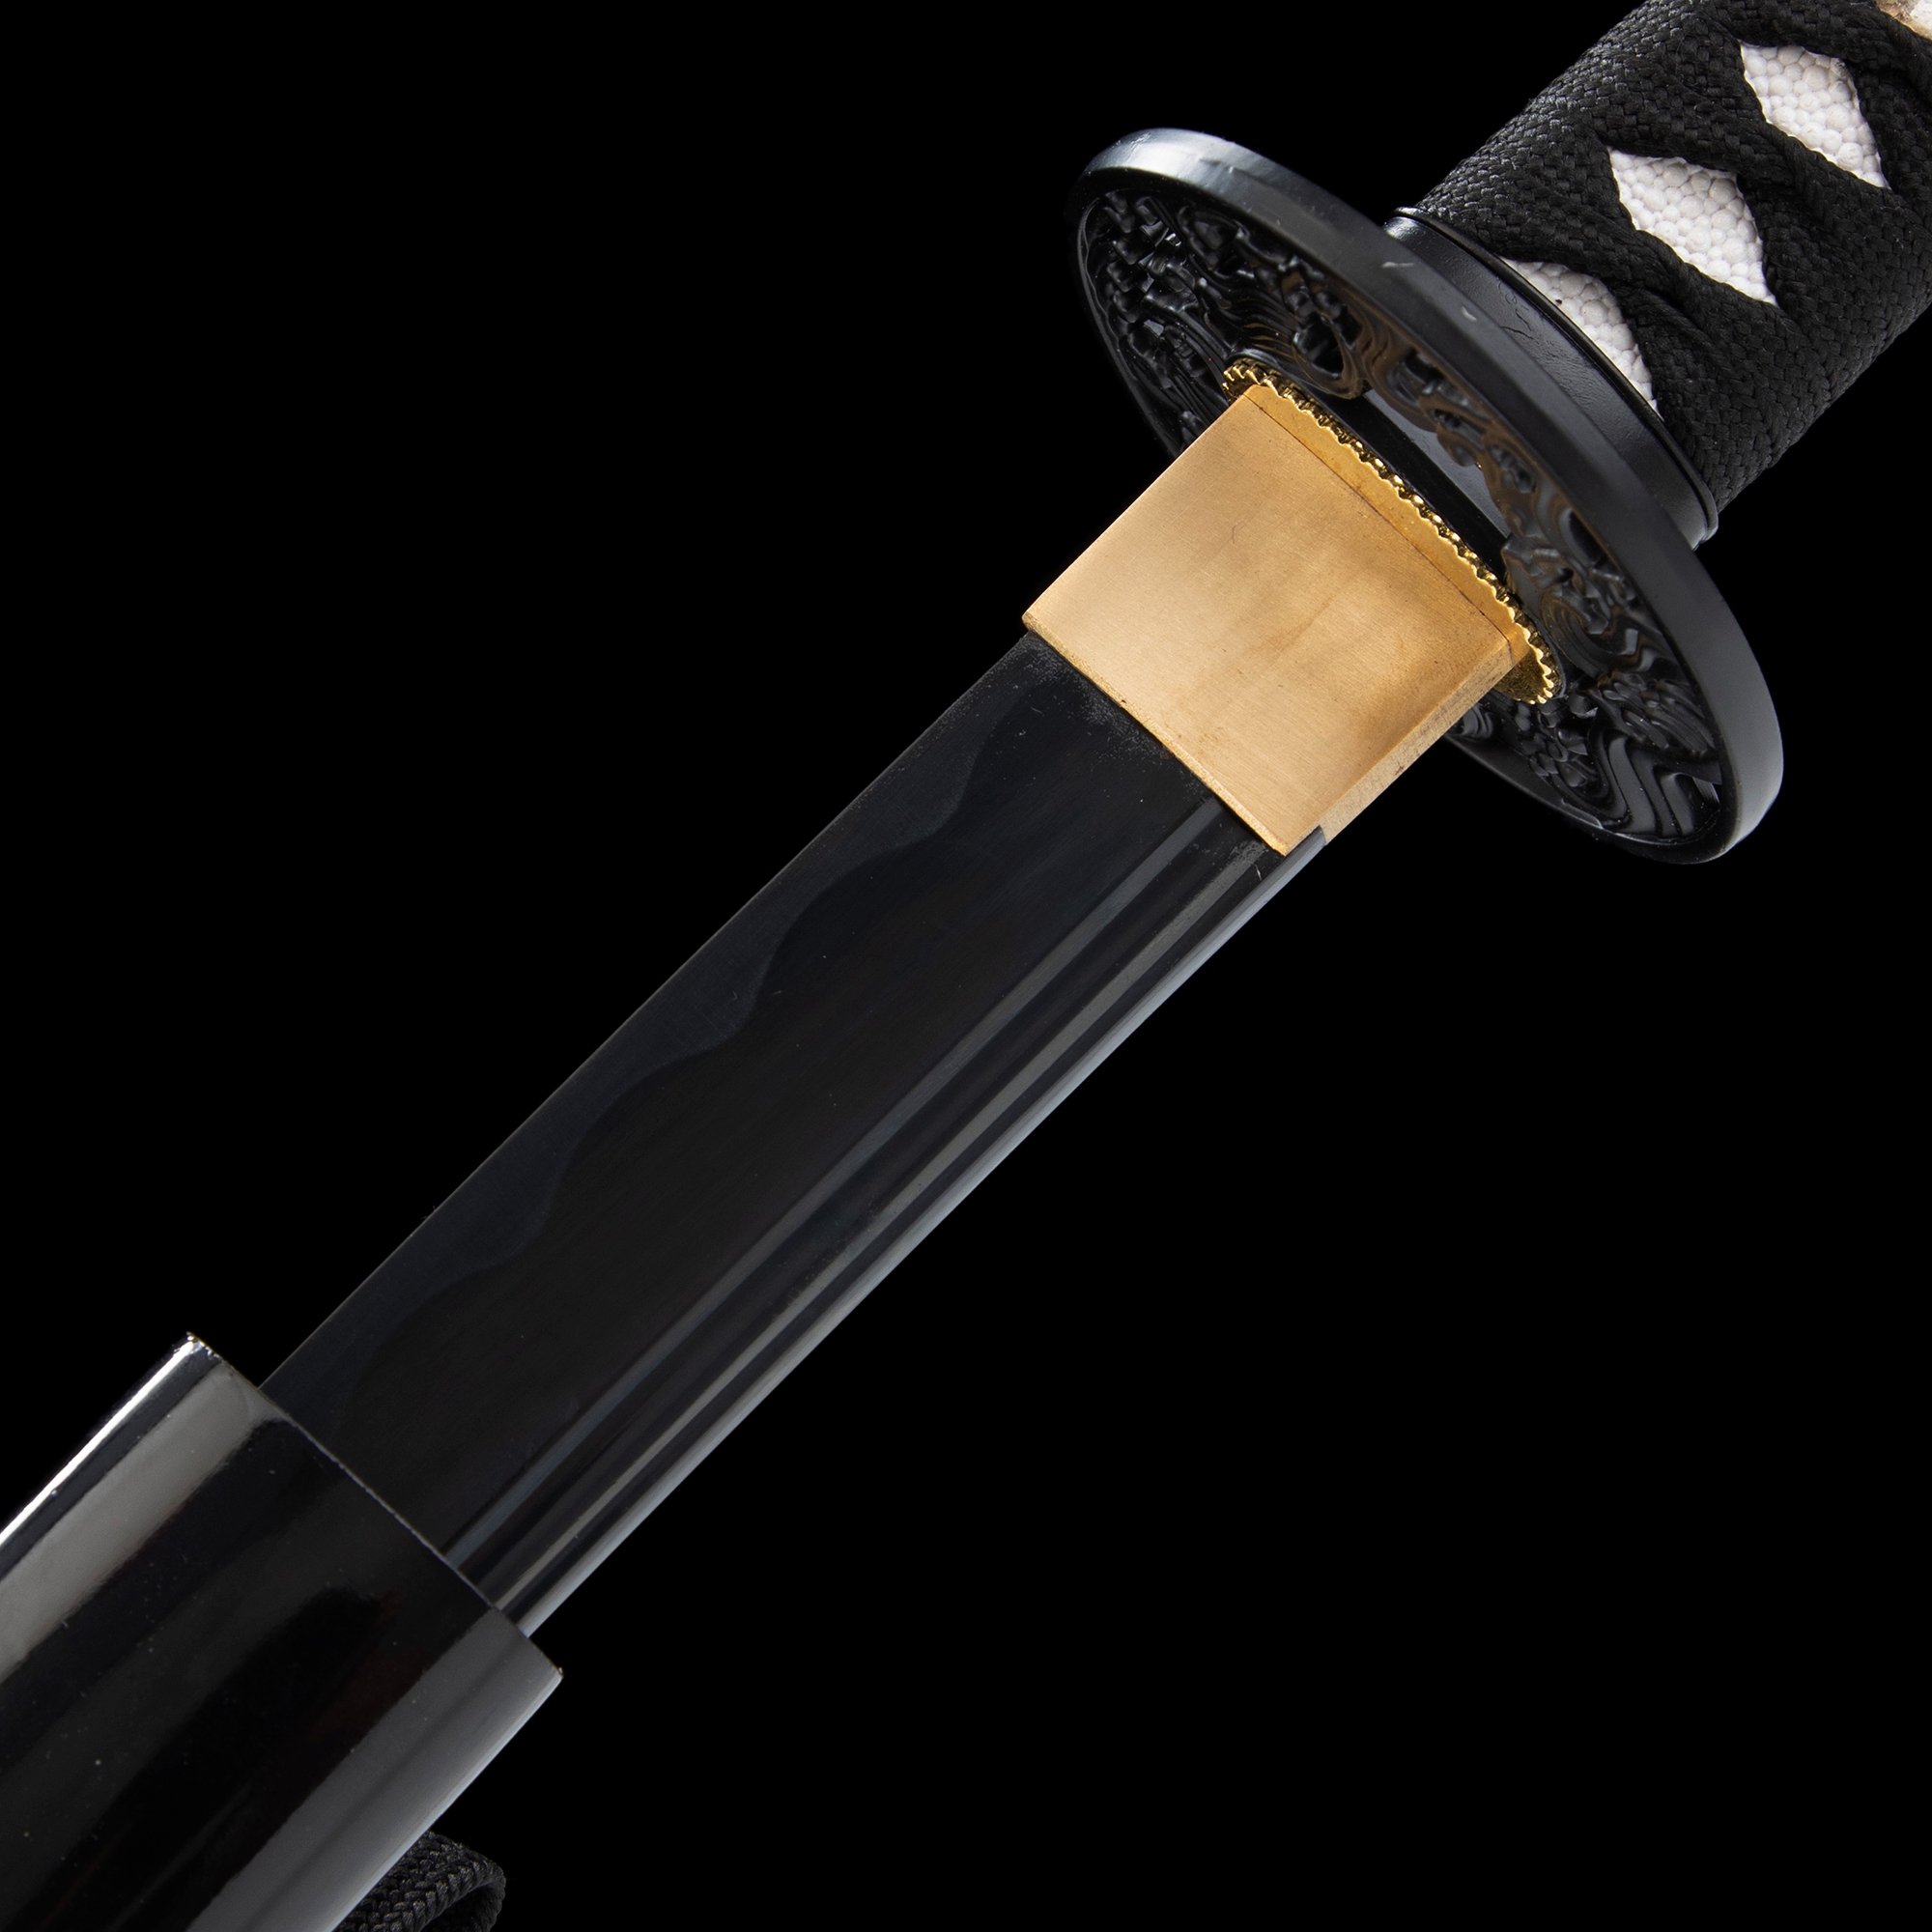 Katana real, fighting sword, Japanese sword, 1060 high manganese steel  blade, hand-ground, full Tang, tempered, hand-forged, 41 inches